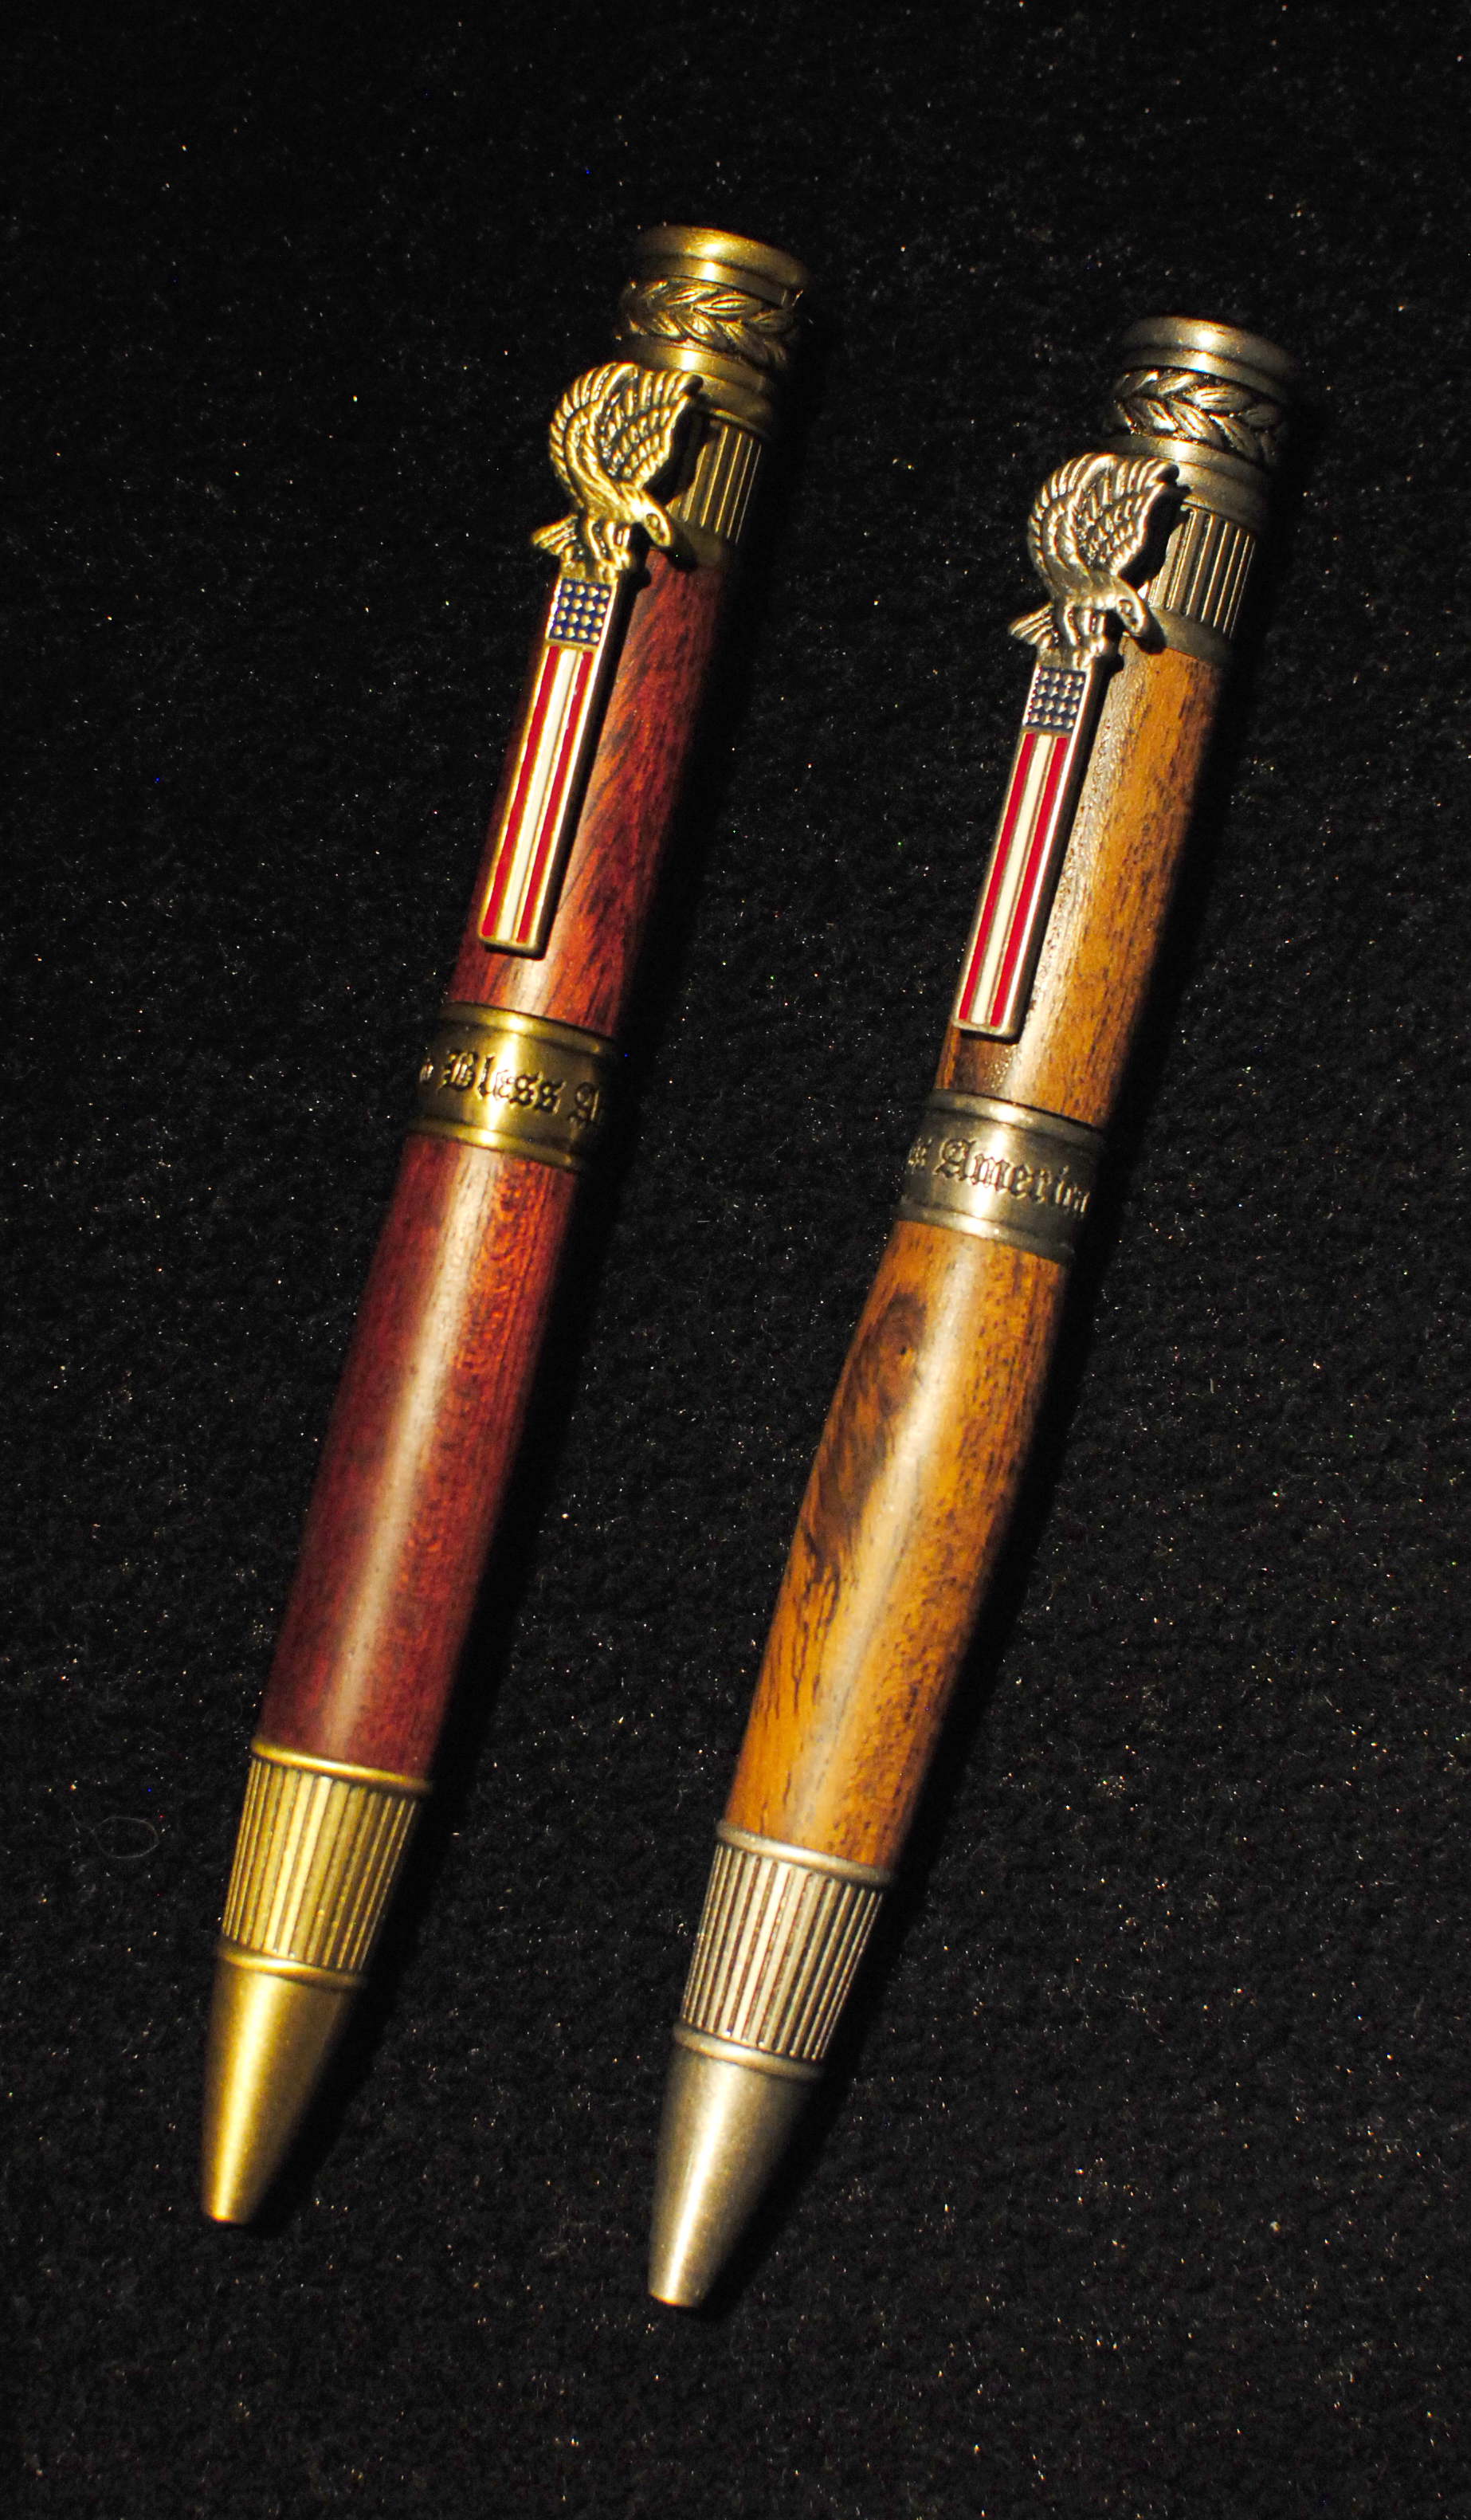 Allywood Creations Patriot (God Bless America) Pen - Wood